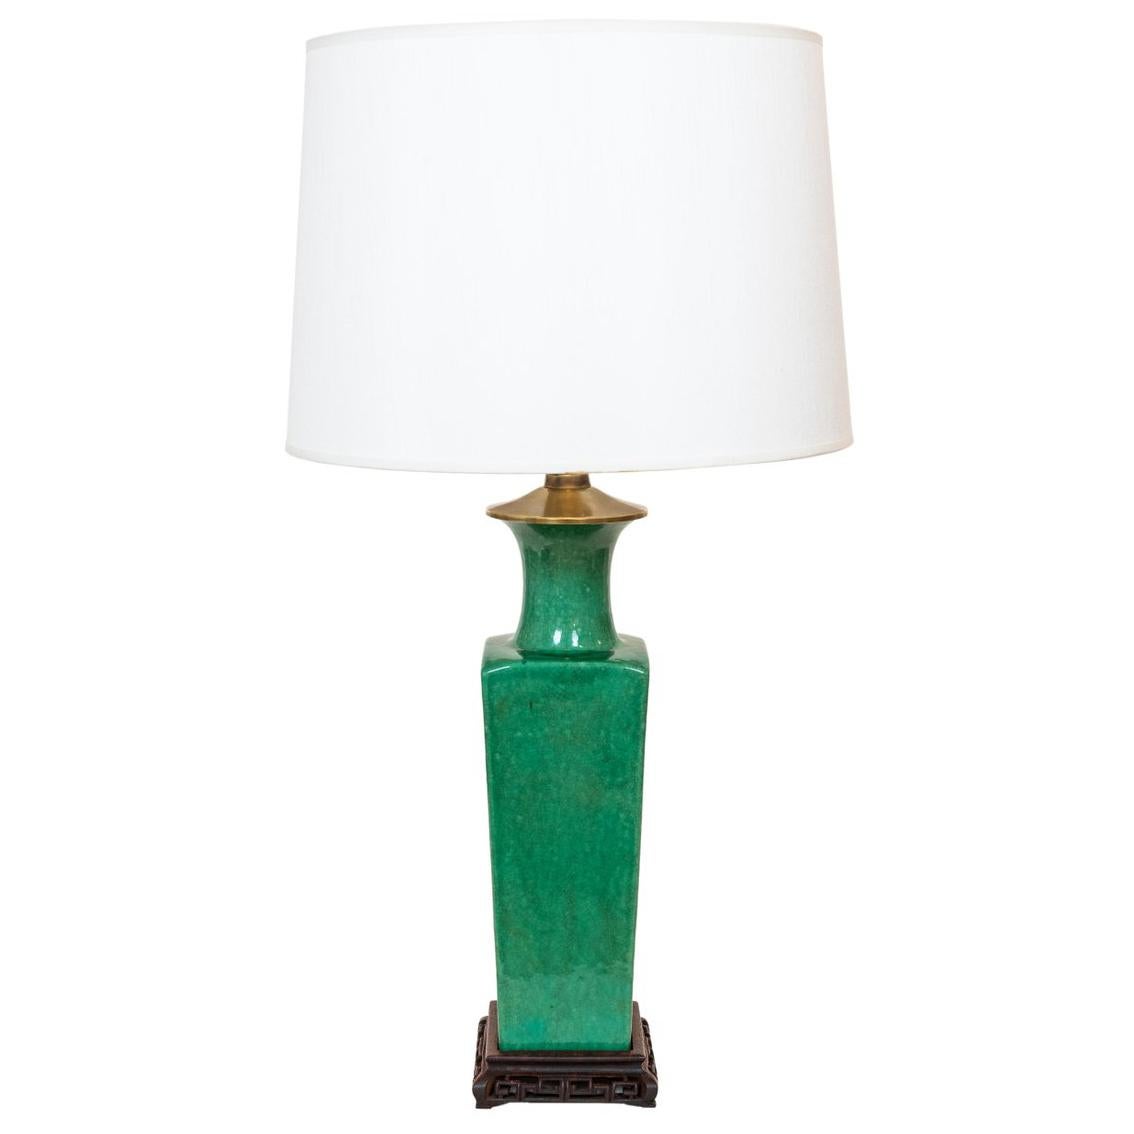 Late 19th-Early 20th Century Apple Green Chinese Urn Shaped Table Lamp